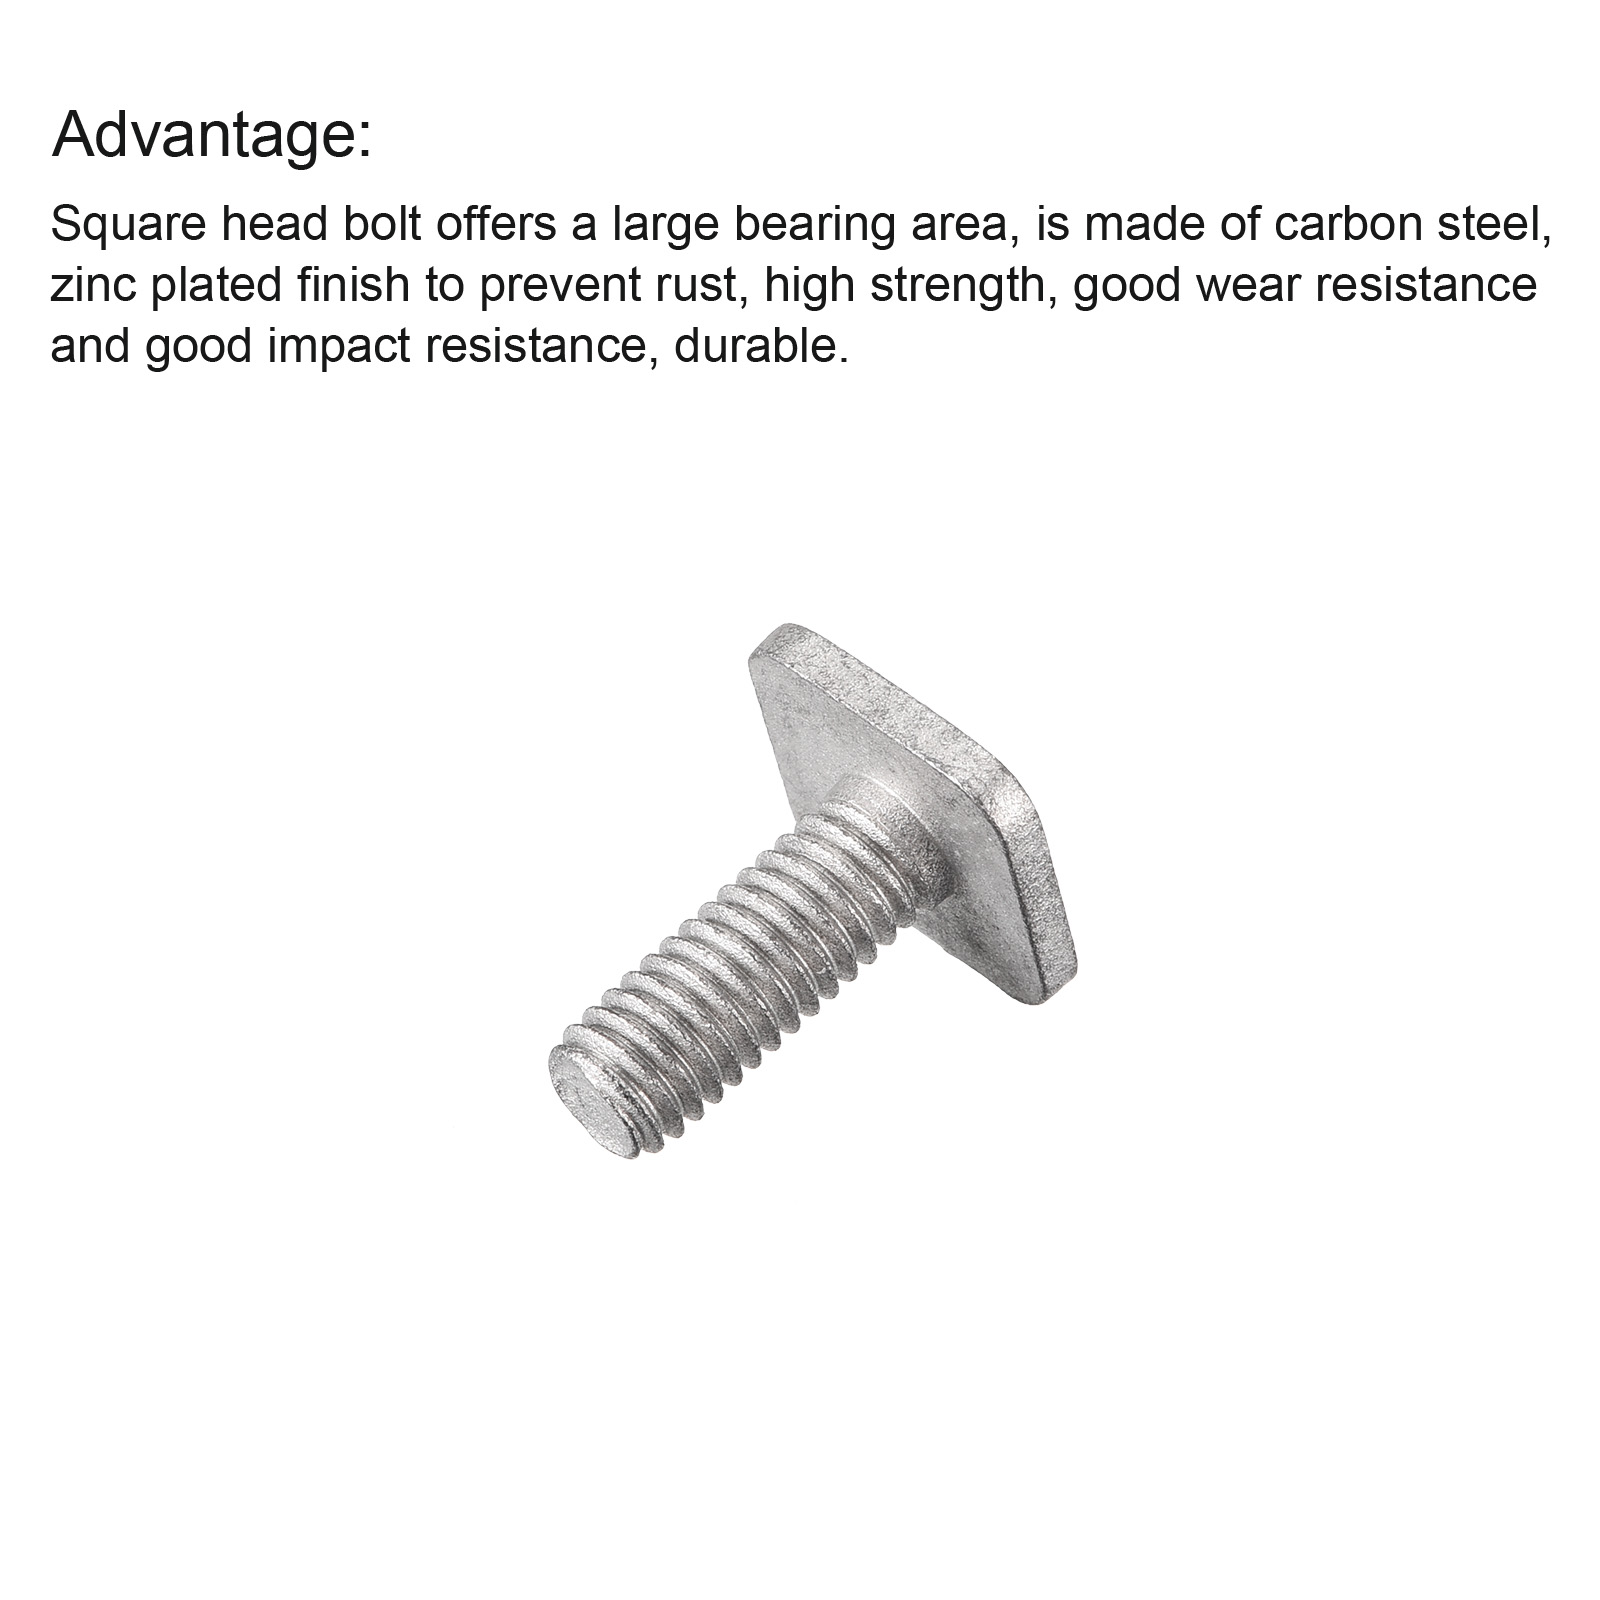 Square Head Bolt, 20 Pack M6x16mm Carbon Steel Grade 8.8 Square Screws, Gray - image 4 of 5